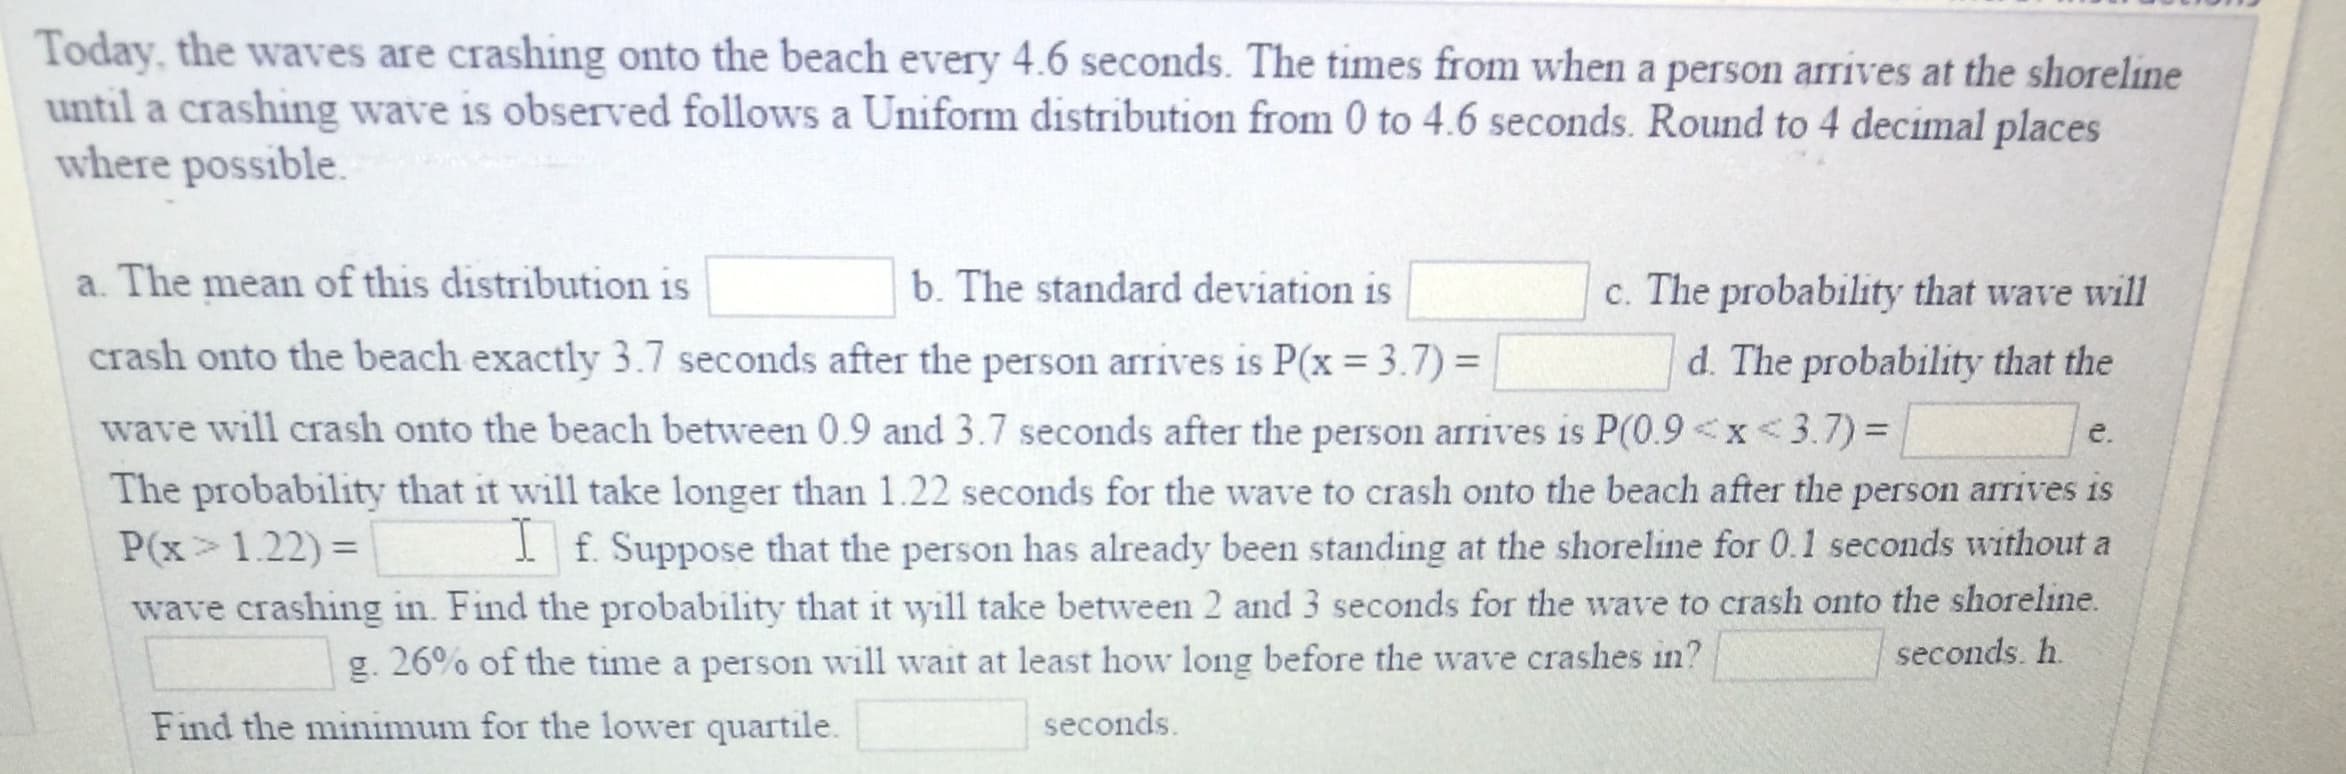 Today, the waves are crashing onto the beach every 4.6 seconds. The times from when a person arrives at the shoreline
until a crashing wave is observed follows a Uniform distribution from 0 to 4.6 seconds. Round to 4 decimal places
where possible.
a. The mean of this distribution is
crash onto the beach exactly 3.7 seconds after the person arrives is P(x 3.7)
b. The standard deviation is
c. The probability that wave will
d. The probability that the
e.
The probability that it will take longer than 1.22 seconds for the wave to crash onto the beach after the person arrives is
wave will crash onto the beach between 0.9 and 3.7 seconds after the person arrives is P(0.9 < x < 37) =
. Suppose that the person has already been standing at the shoreline for 0.1 seconds without a
wave crashing in. Find the probability that it will take between 2 and 3 seconds for the wave to crash onto the shoreline.
P(x > 1.22) =
g, 26% of the time a person will wait at least how long before the wave crashes in?
seconds. h
Find the minimum for the lower quartile.
seconds
